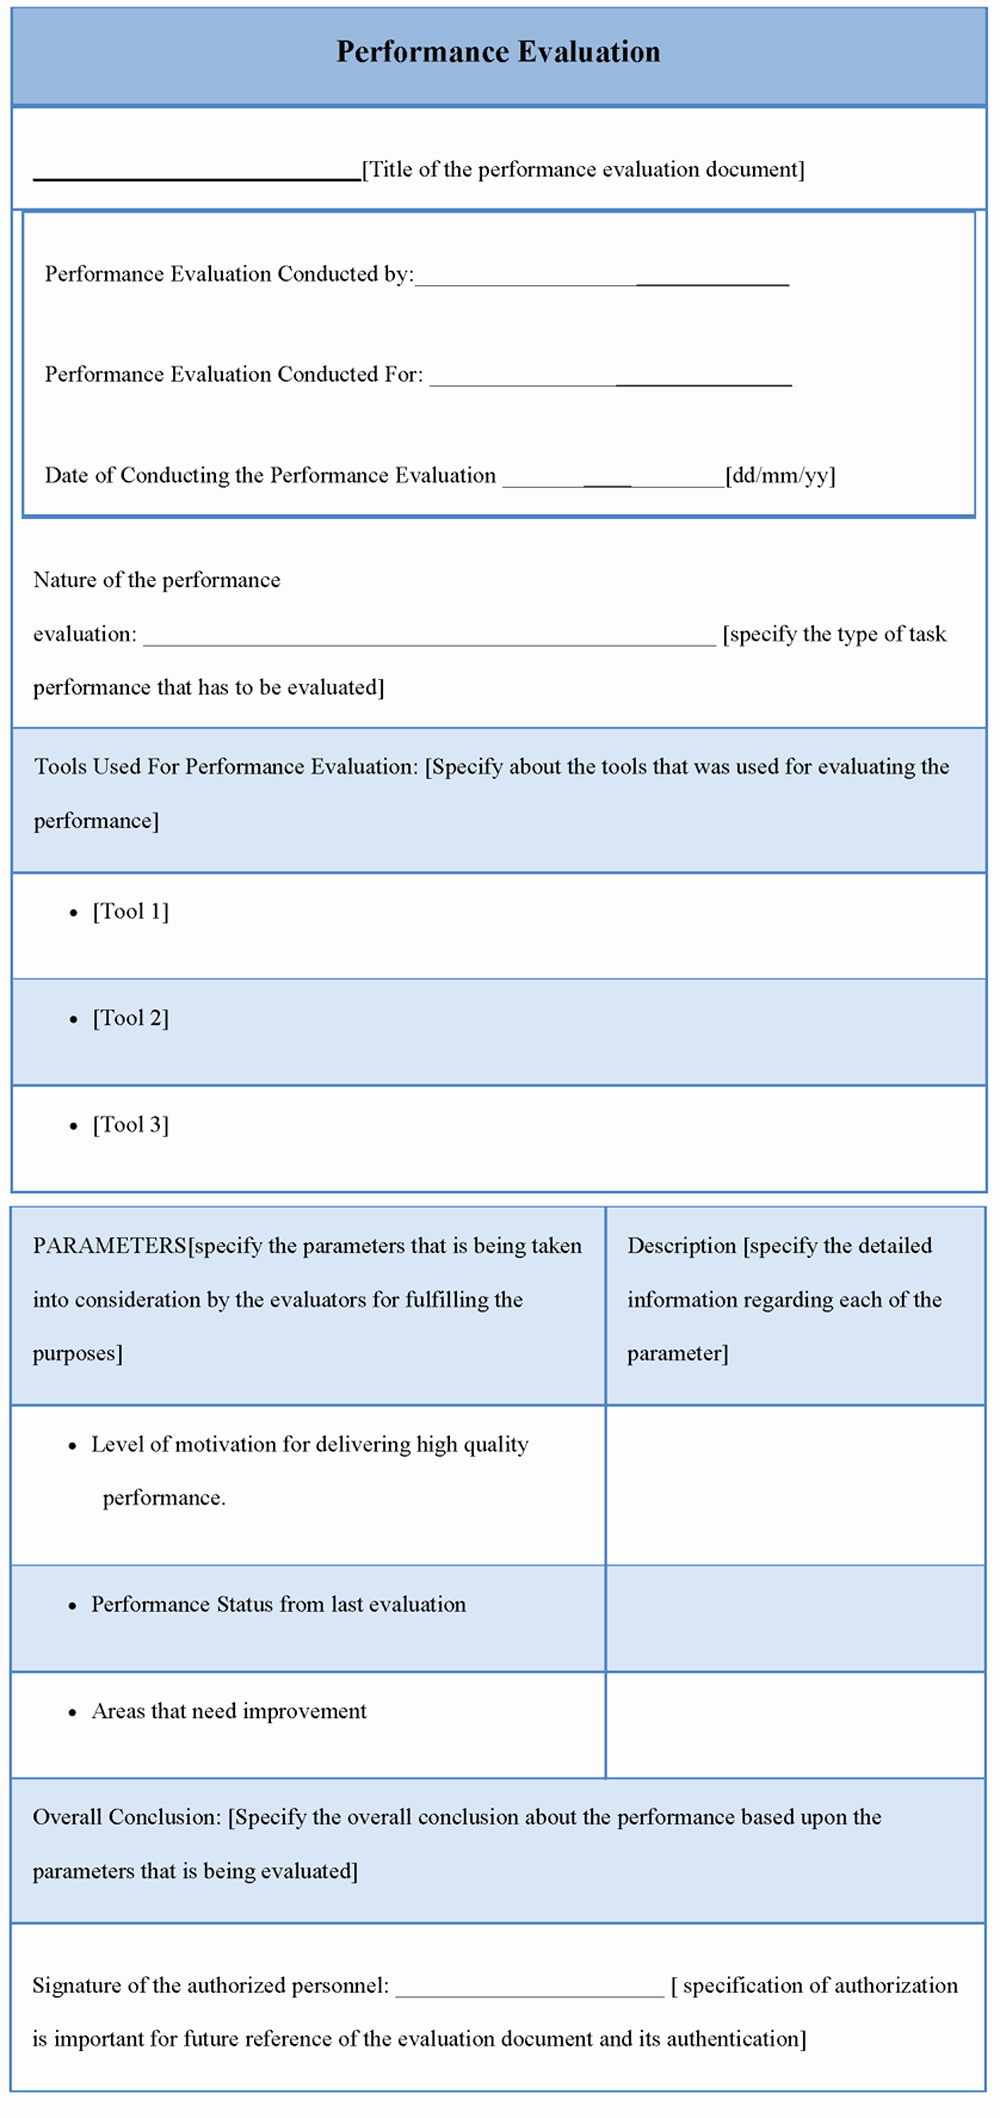 Performance Evaluation form Template Luxury Performance Evaluation Template